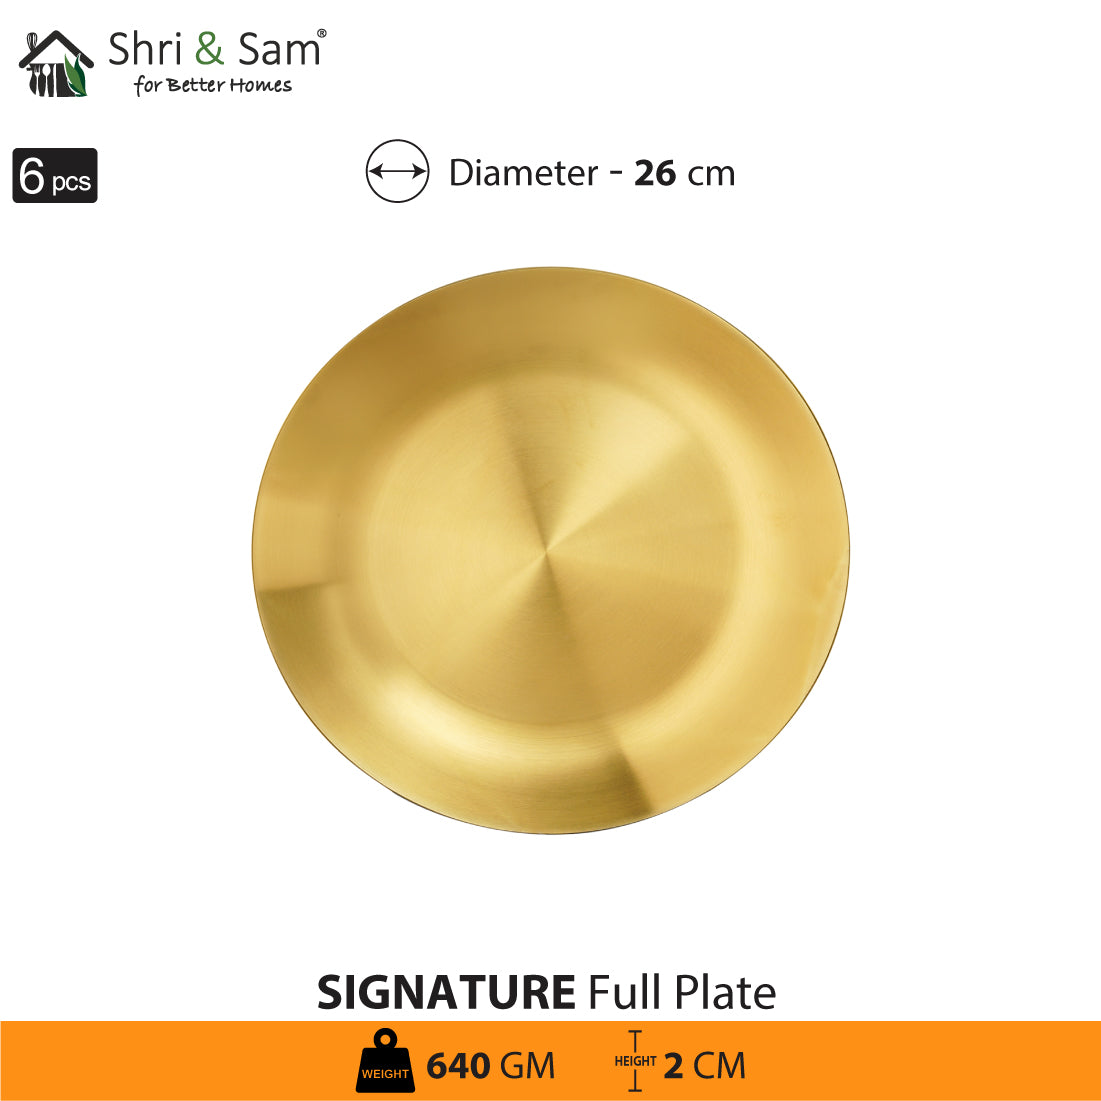 Stainless Steel 6 PCS Full Plate with Gold PVD Coating Signature - Matt